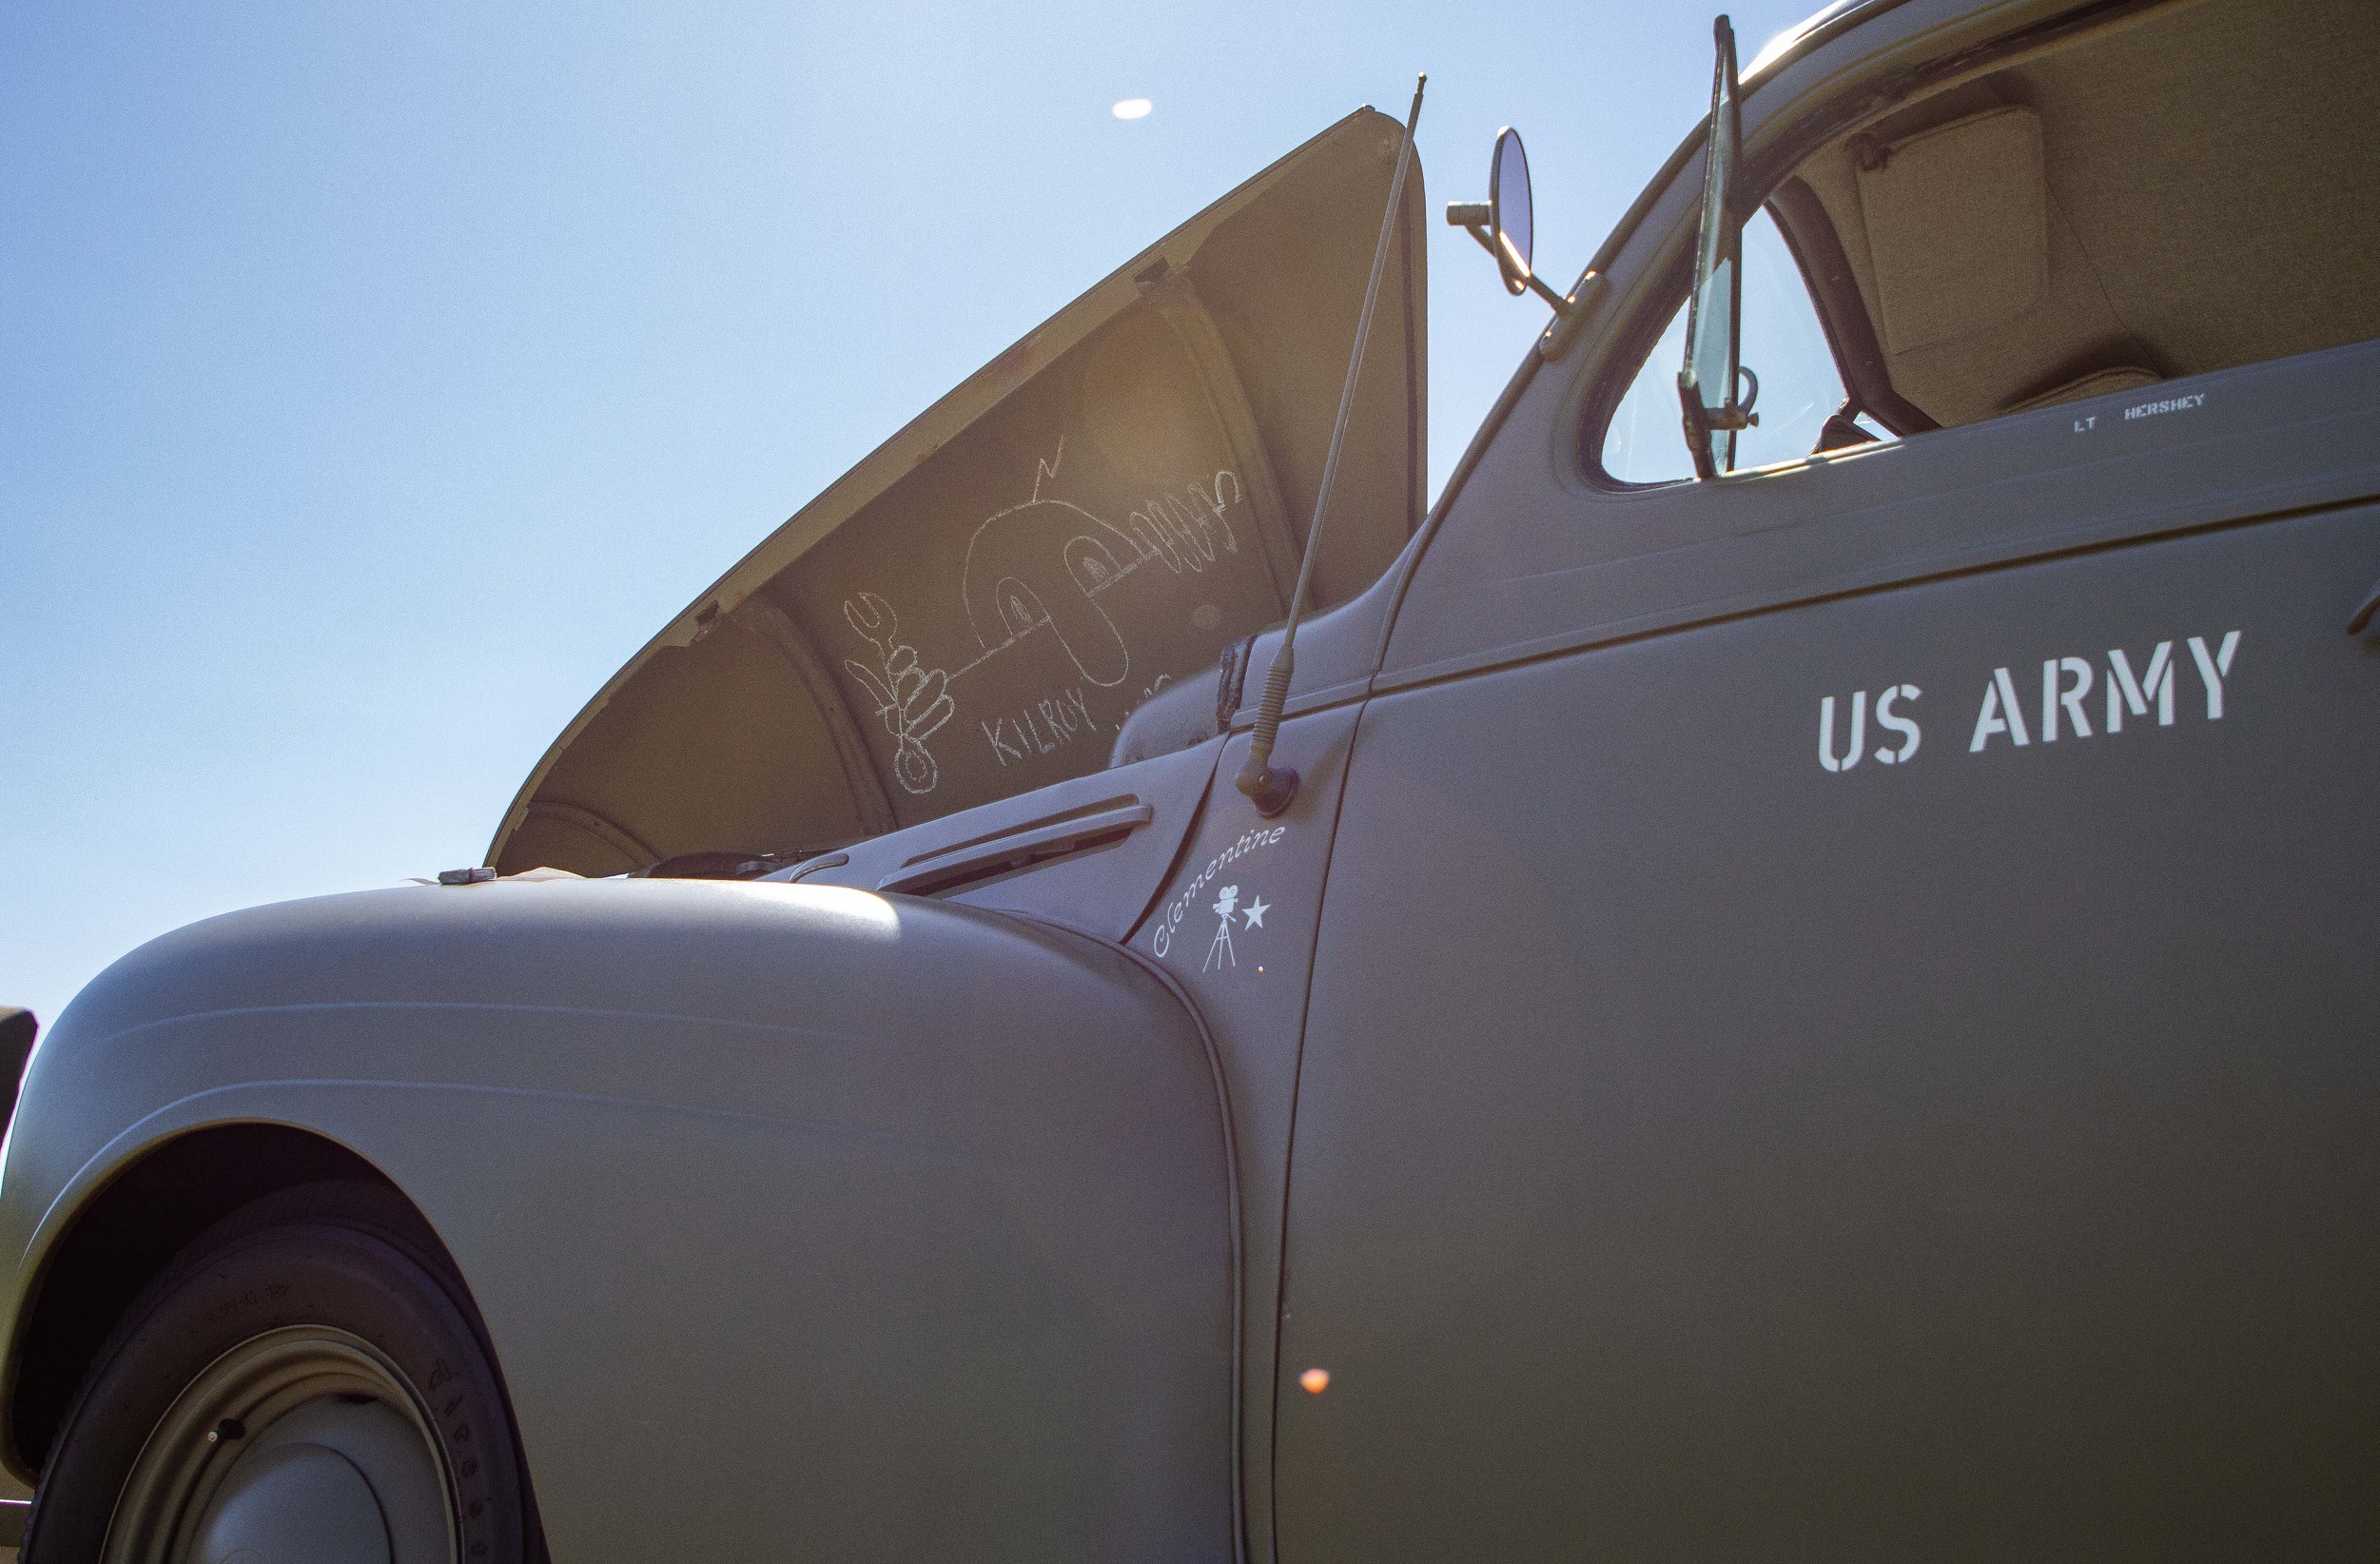 A brown WWII era vehicle with US Army on the side. Under the open hood is a drawing of a figure with text "Kilroy was here"